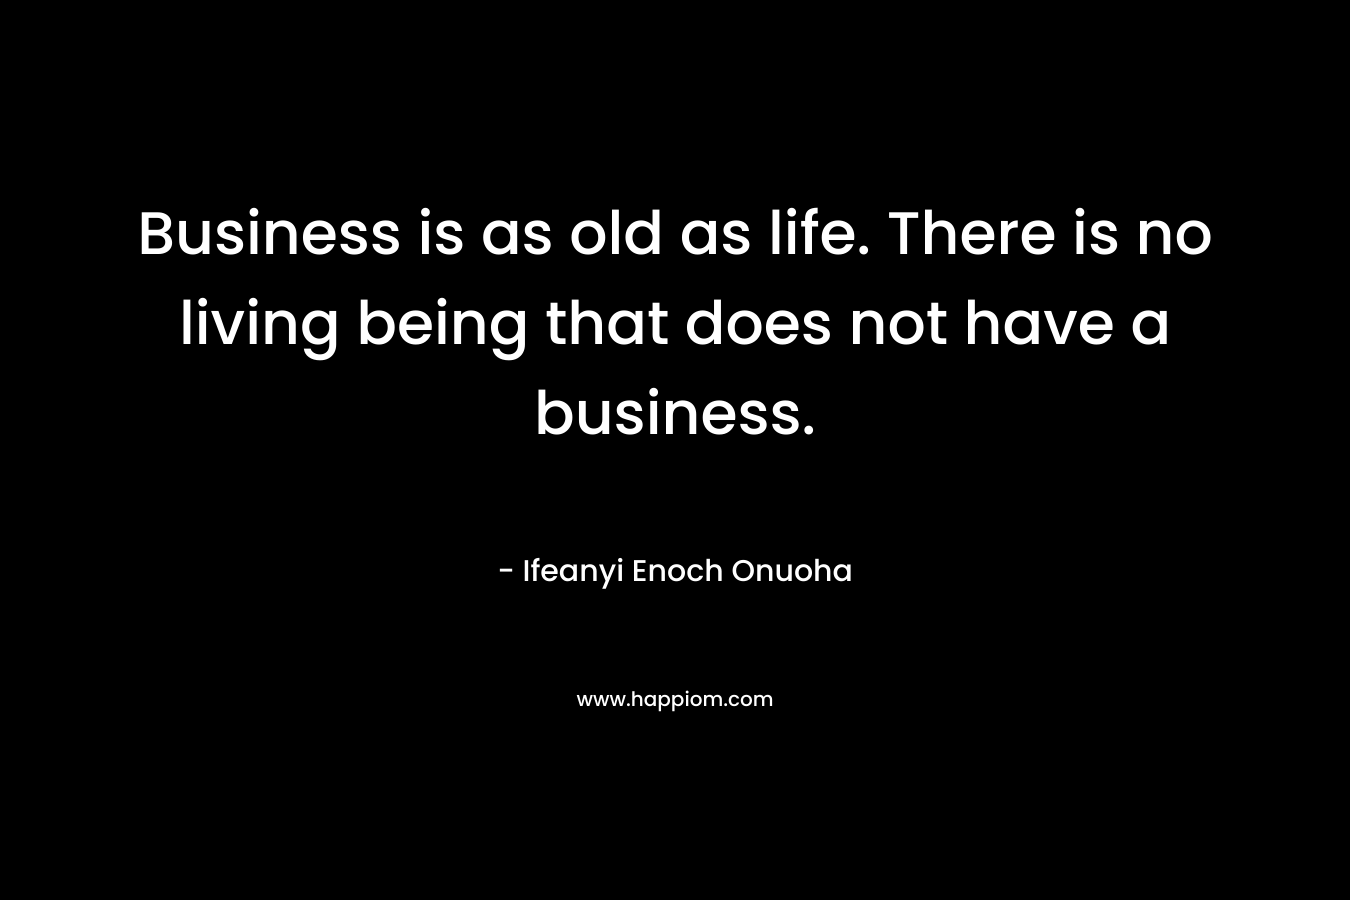 Business is as old as life. There is no living being that does not have a business.